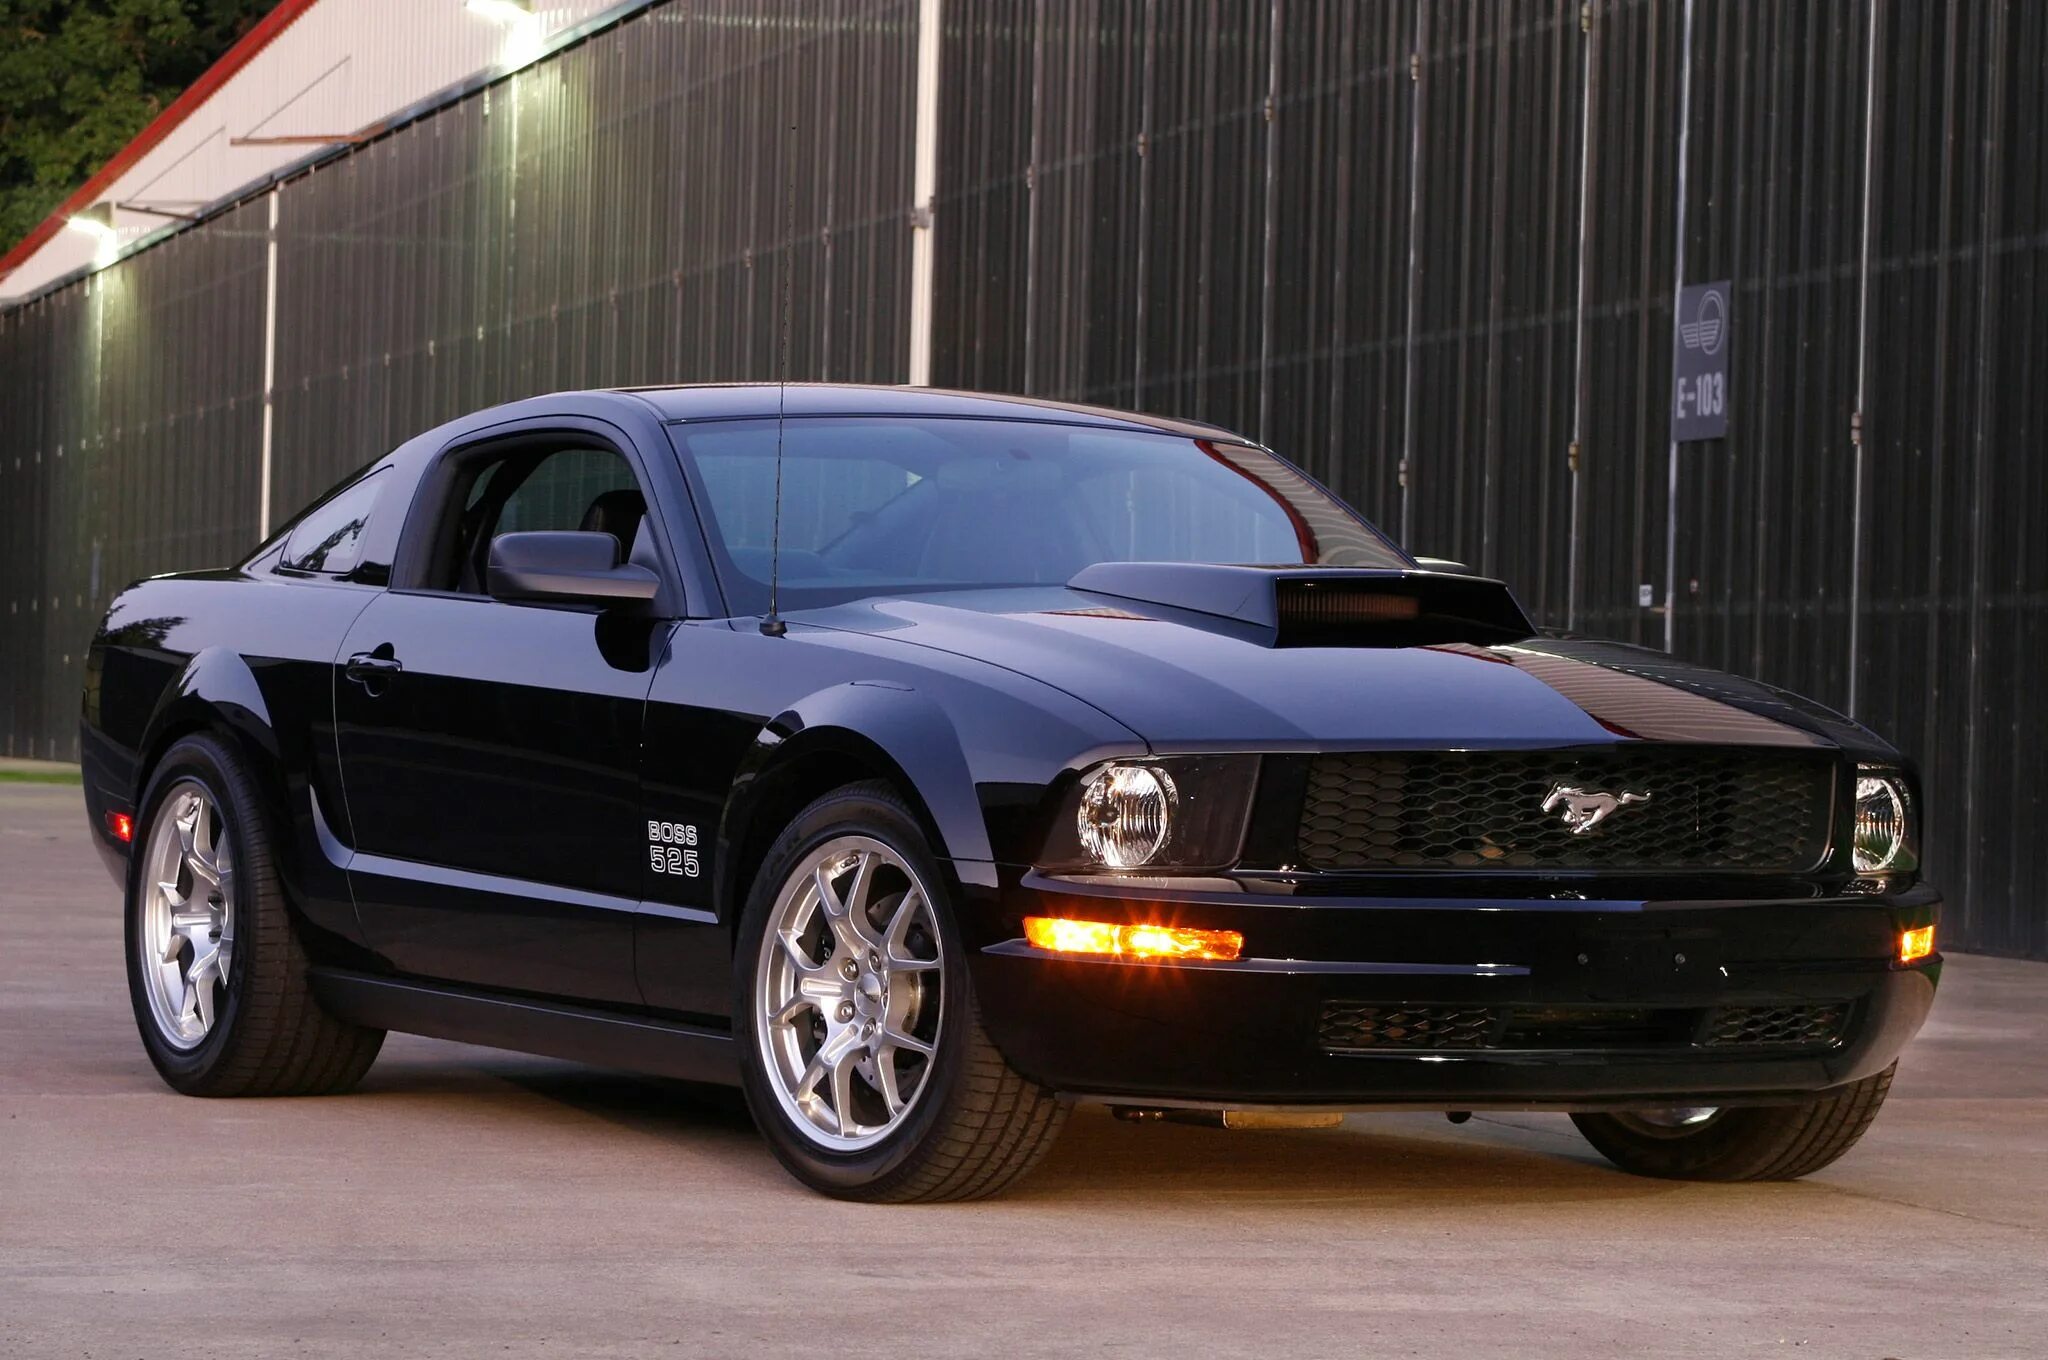 Язык мустангов. Форд Мустанг ГТ 2005. Ford Mustang 2005. Ford Mustang Shelby 2005. Ford Mustang 2005 Boss.